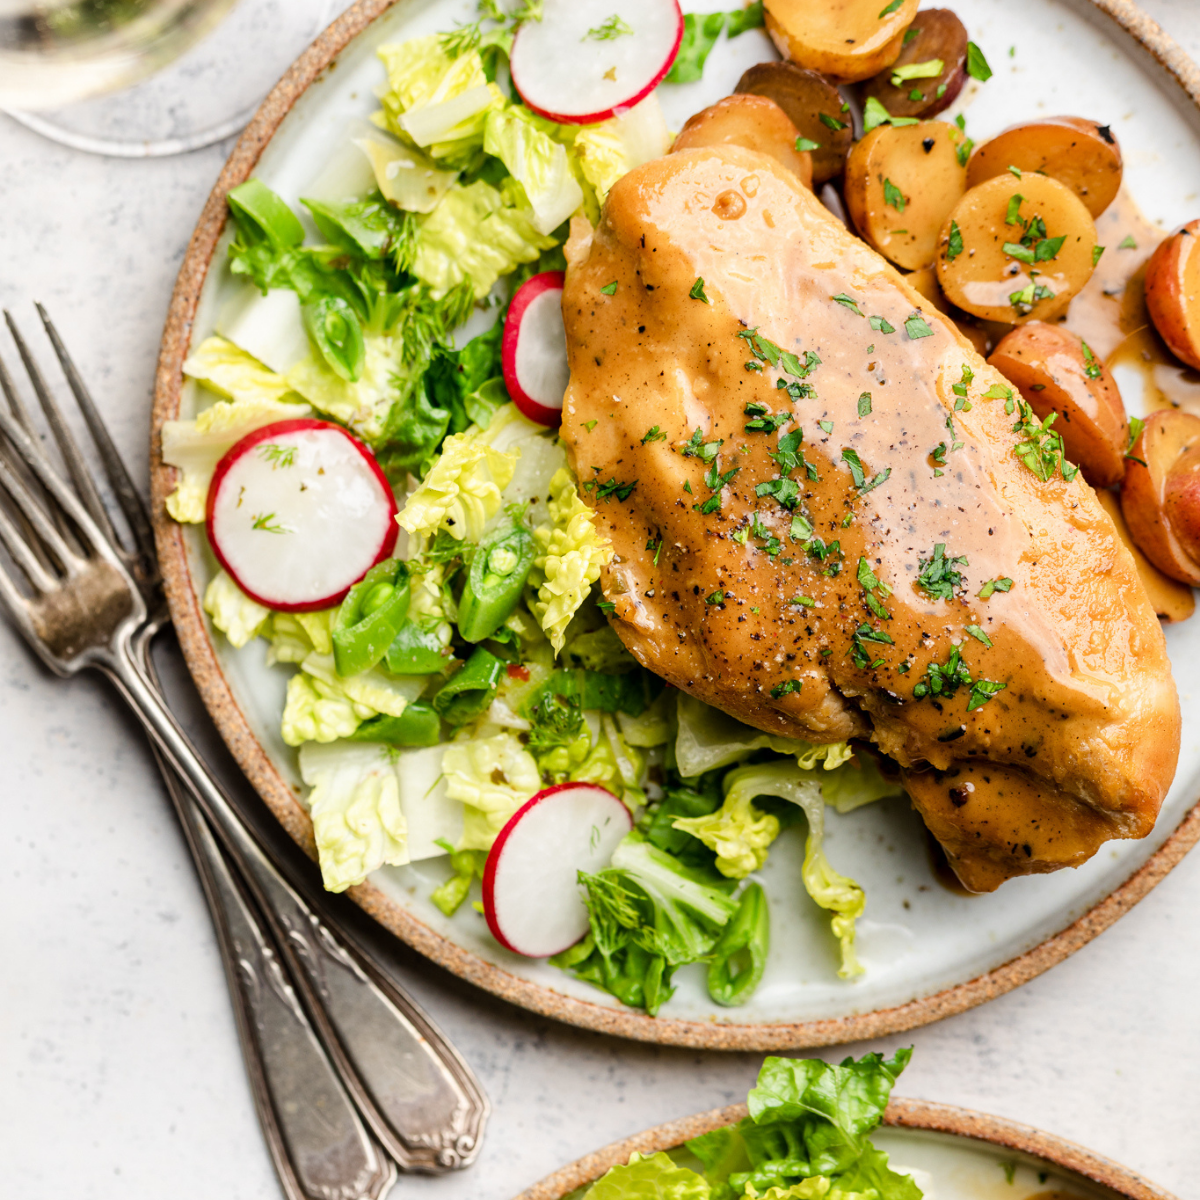 Maple dijon chicken on a plate with fresh salad and potatoes